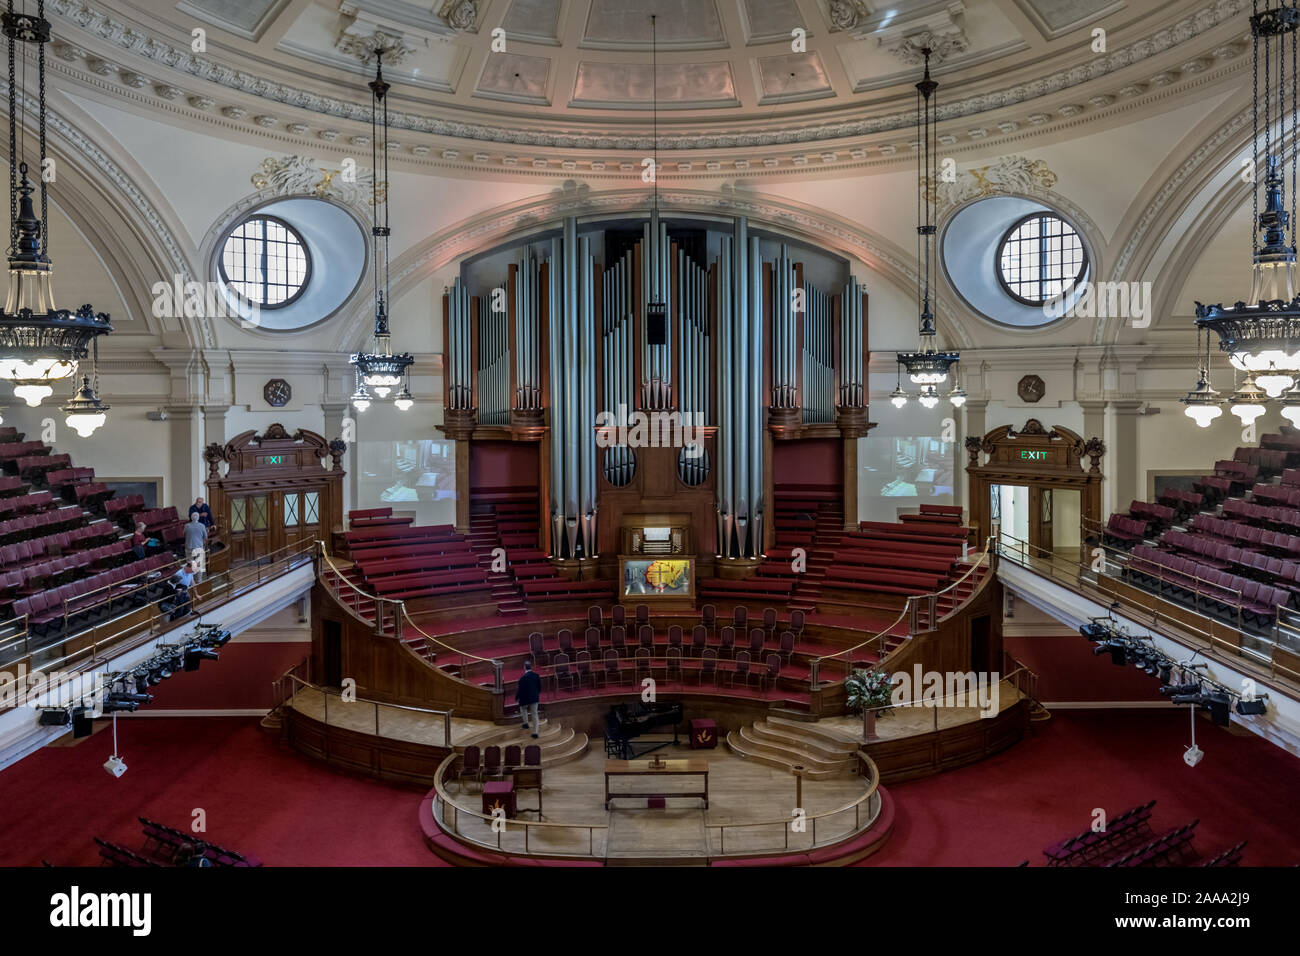 The Great Hall inside the Methodist Central Hall, Westminster, London, England. Stock Photo